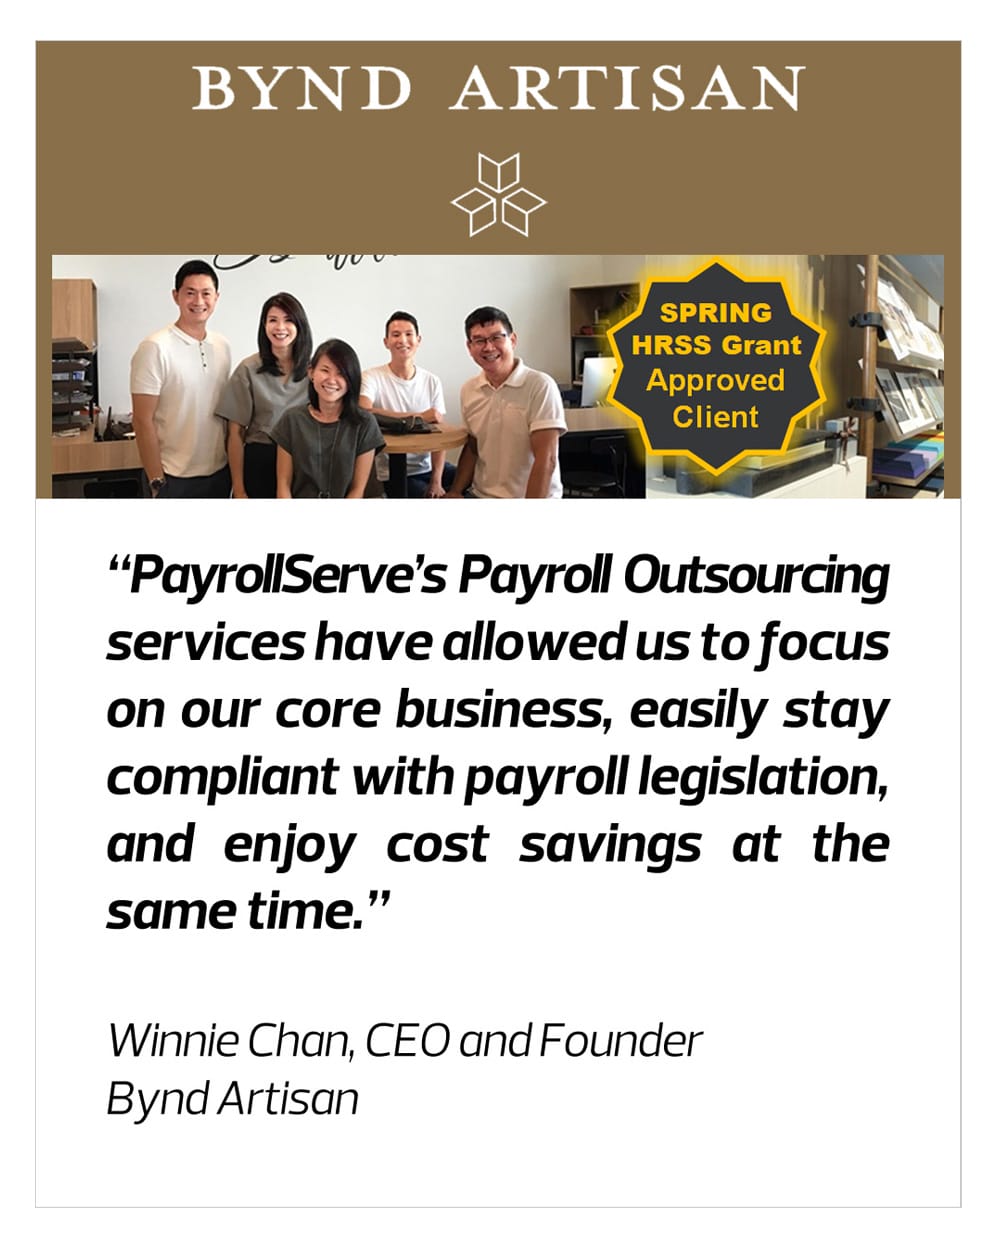 PayrollServe have allowed us to focus on our core business, easily stay compliant with payroll legistration and enjoy cost saving at the same time. - Bynd Artisan